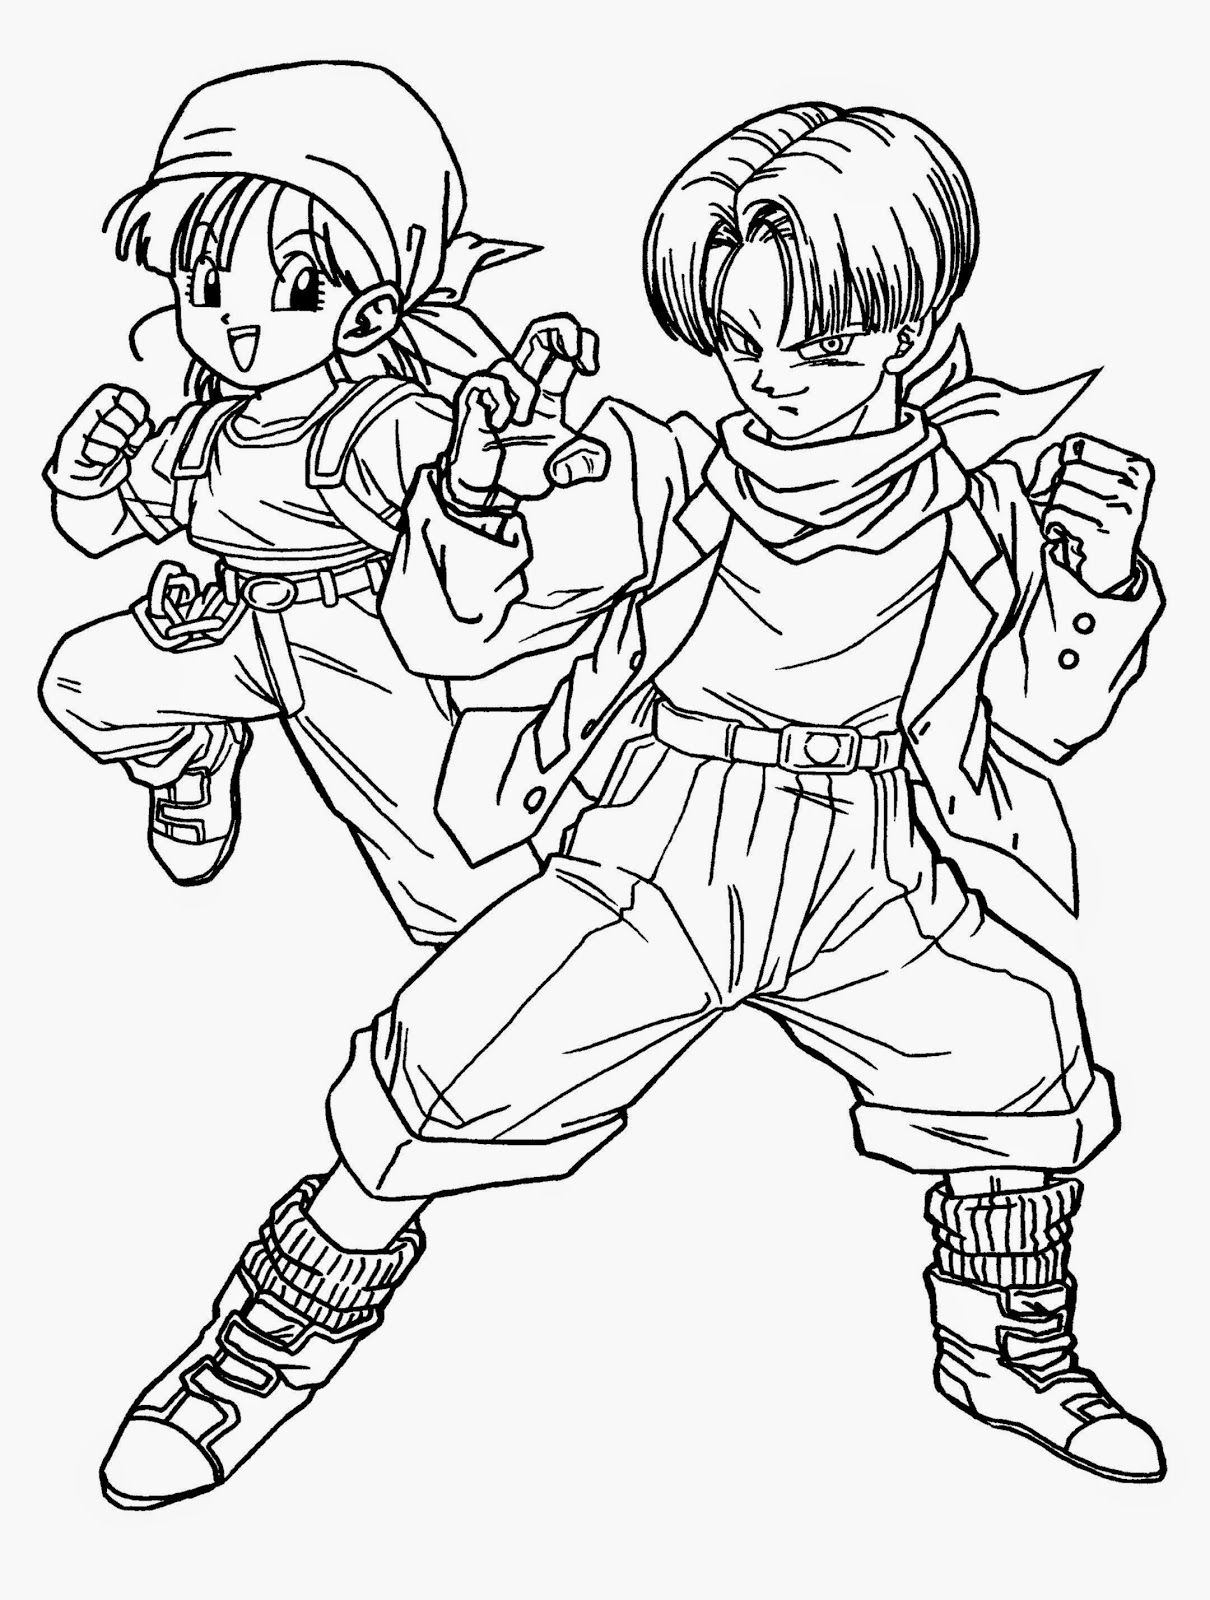 Dragon Ball Z Coloring Book | Free Coloring Pages